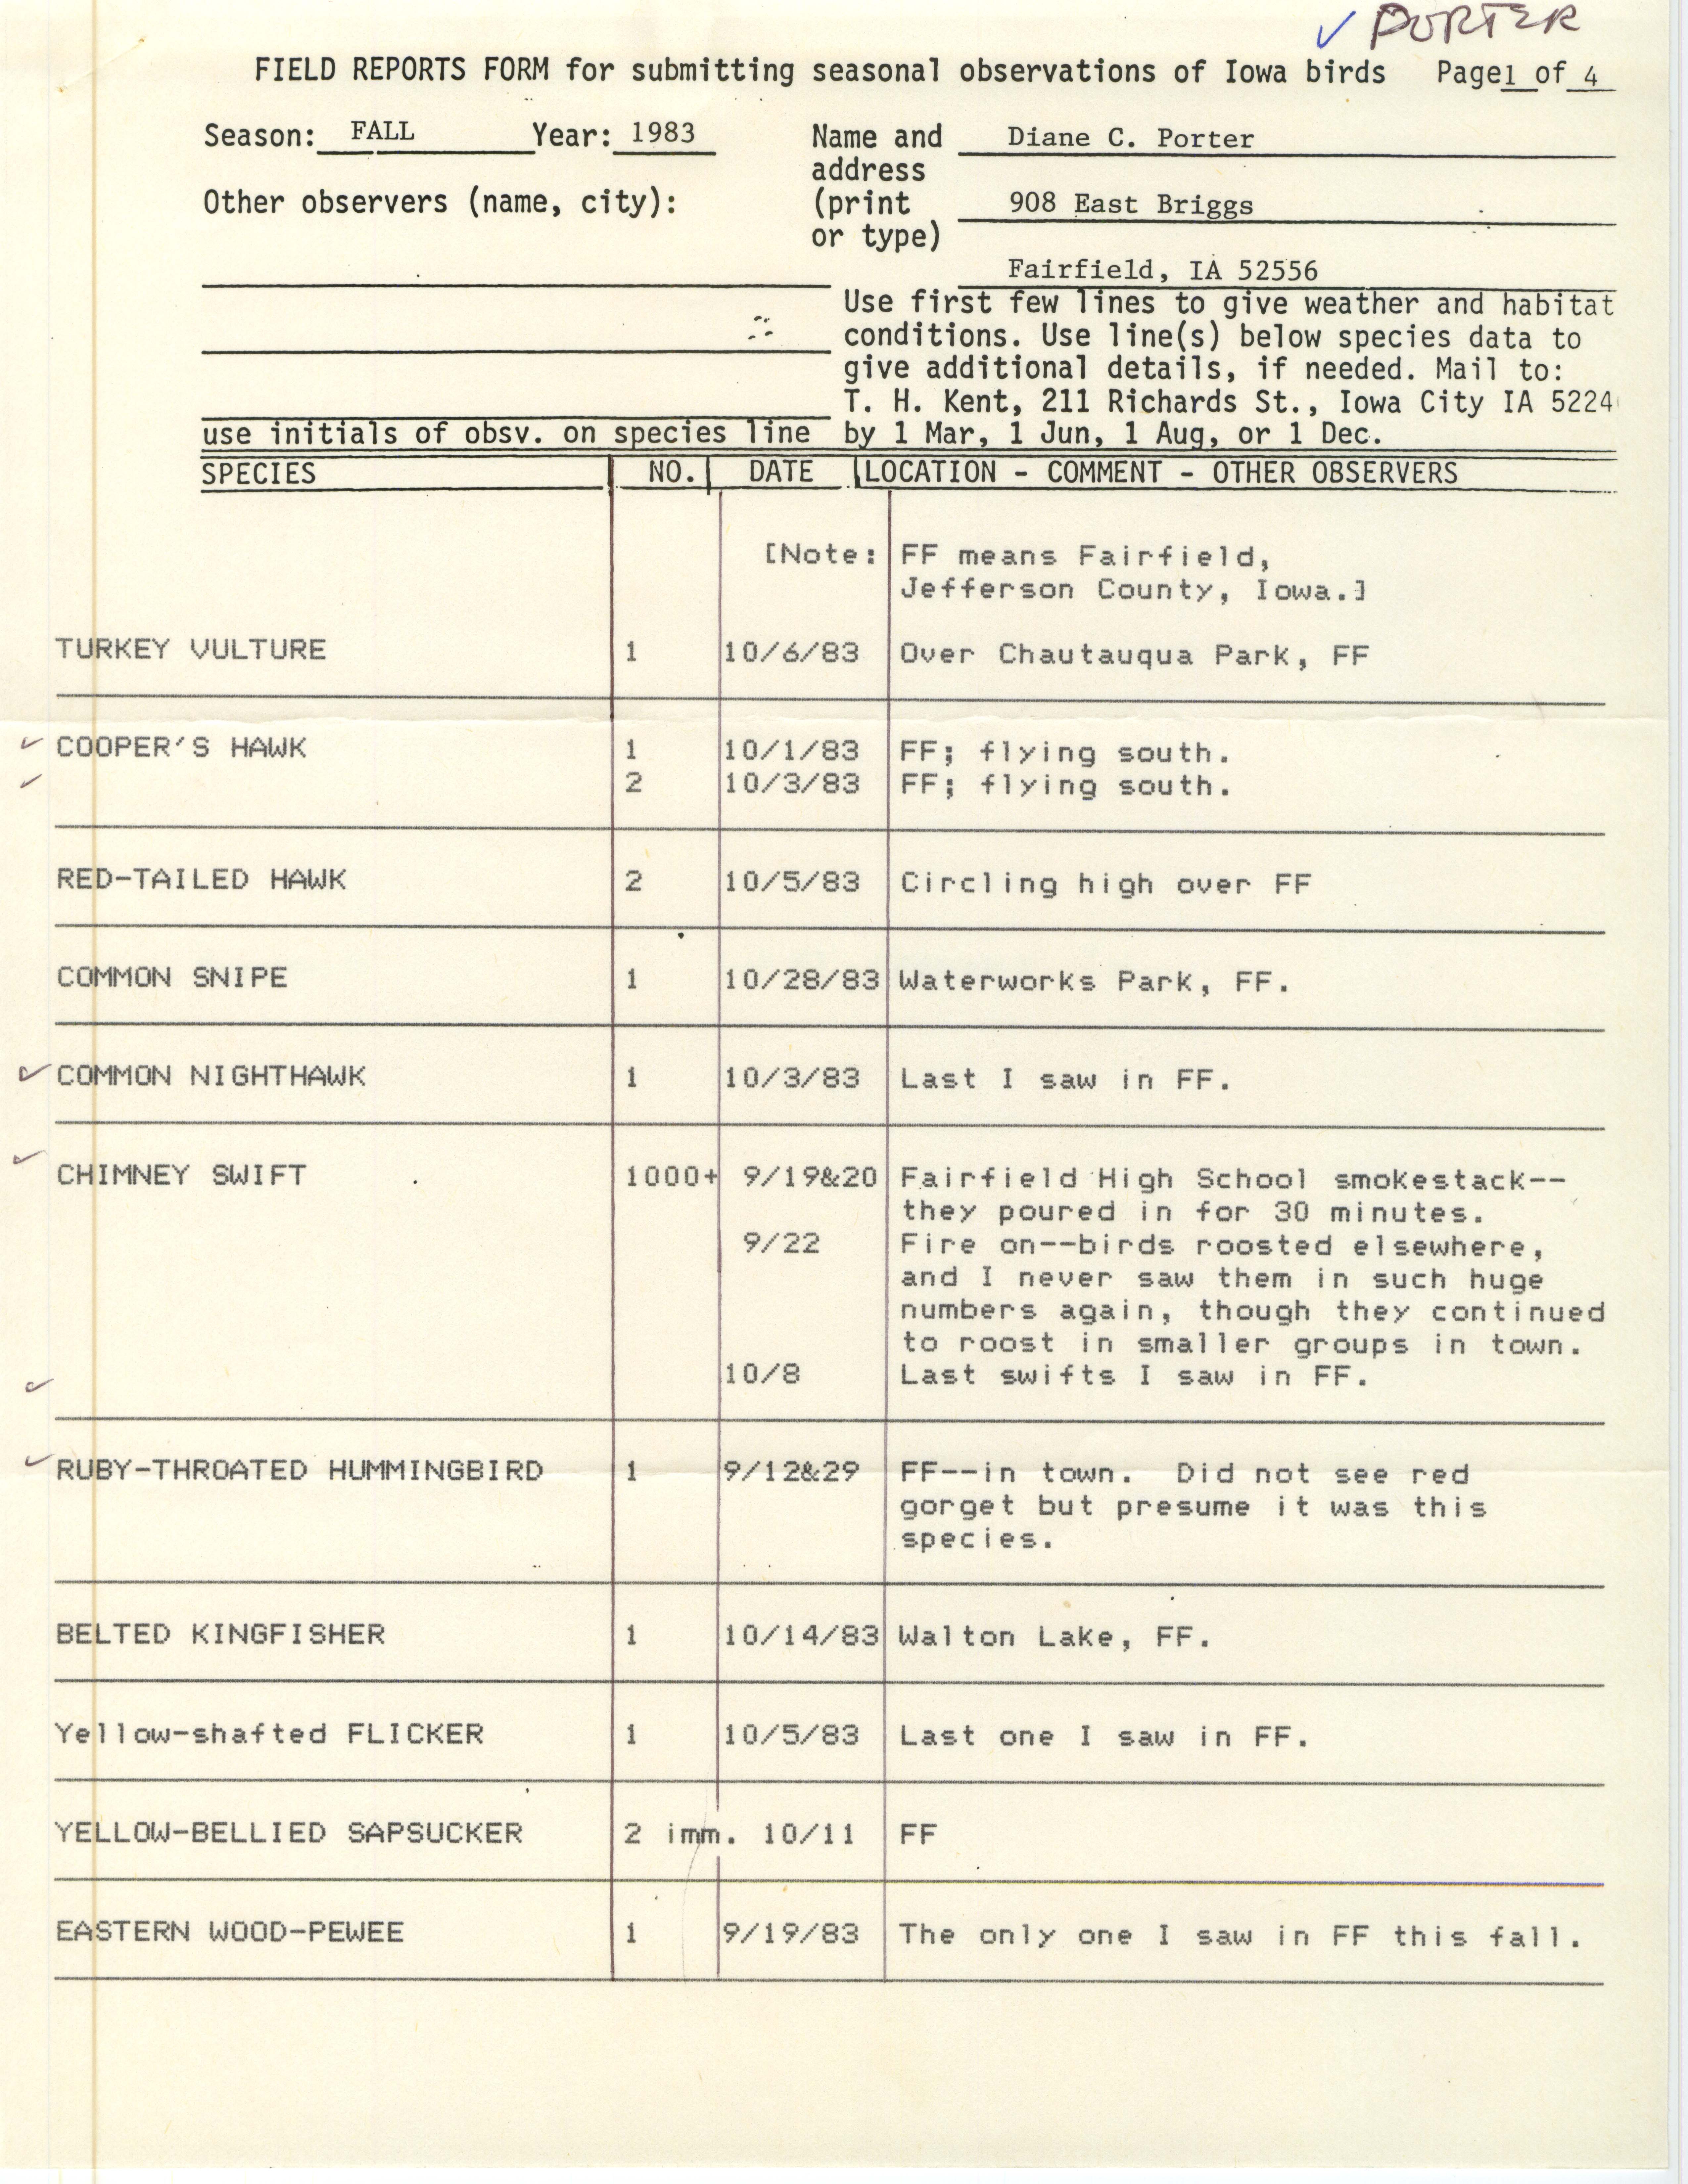 Field reports form for submitting seasonal observations of Iowa birds, Diane Porter, fall 1983